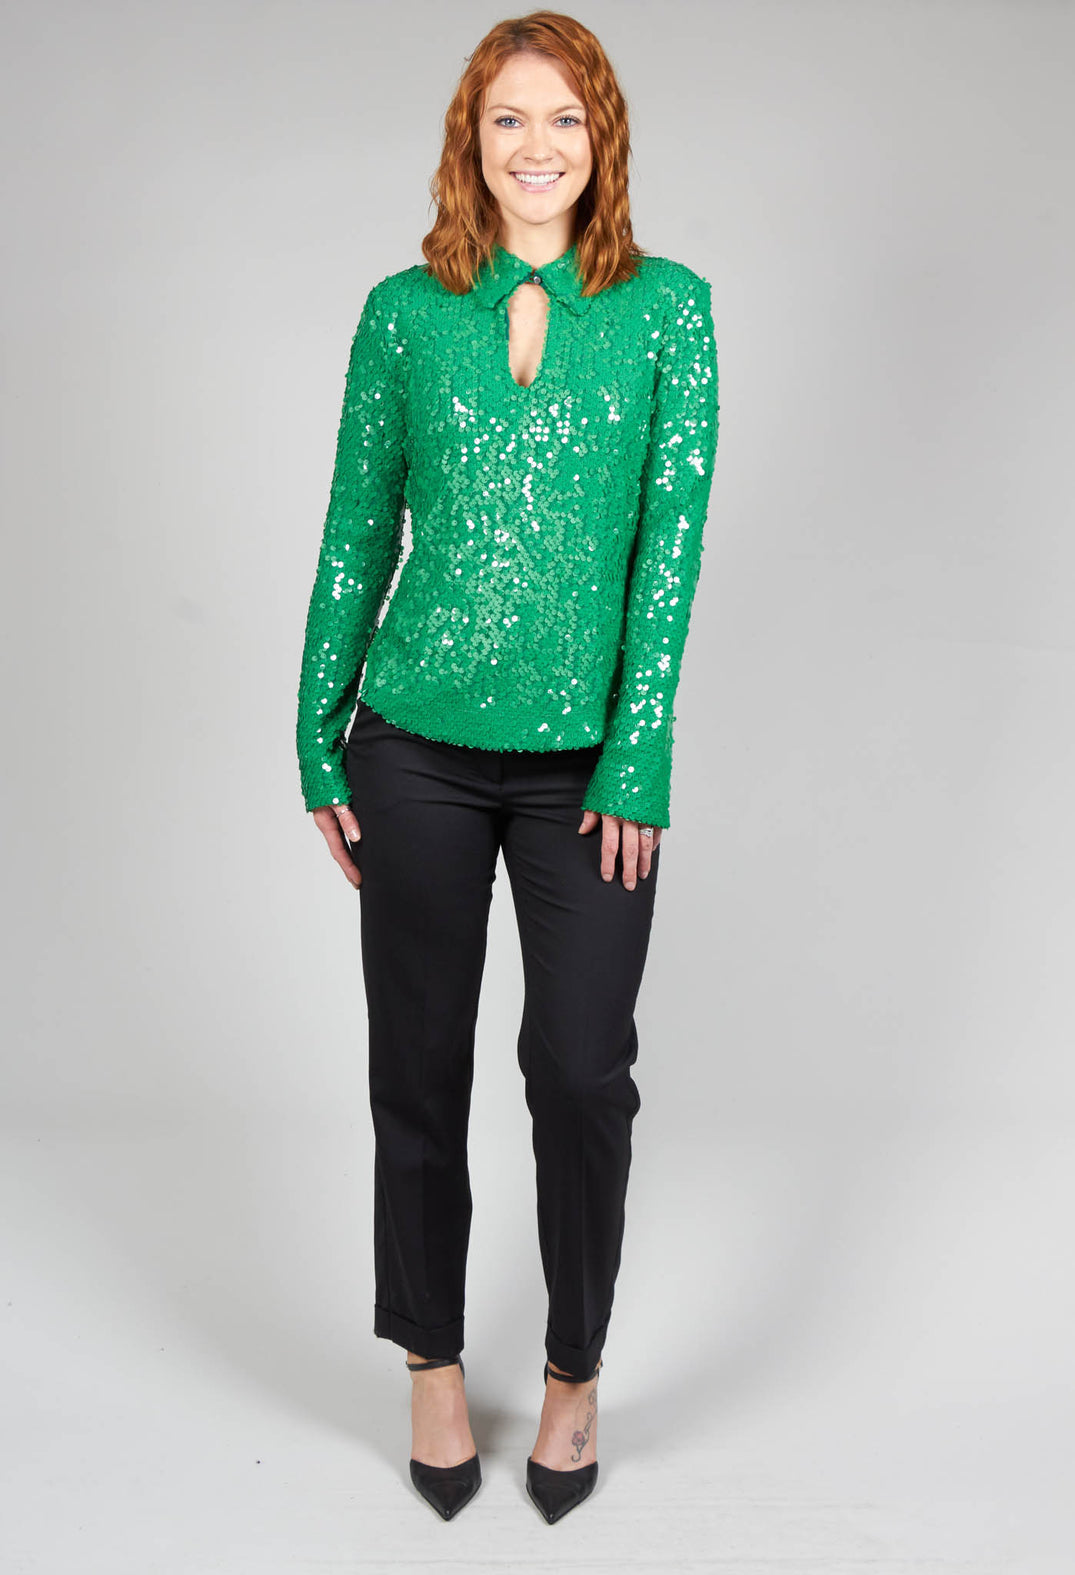 lady smiling in her green sequin blouse 